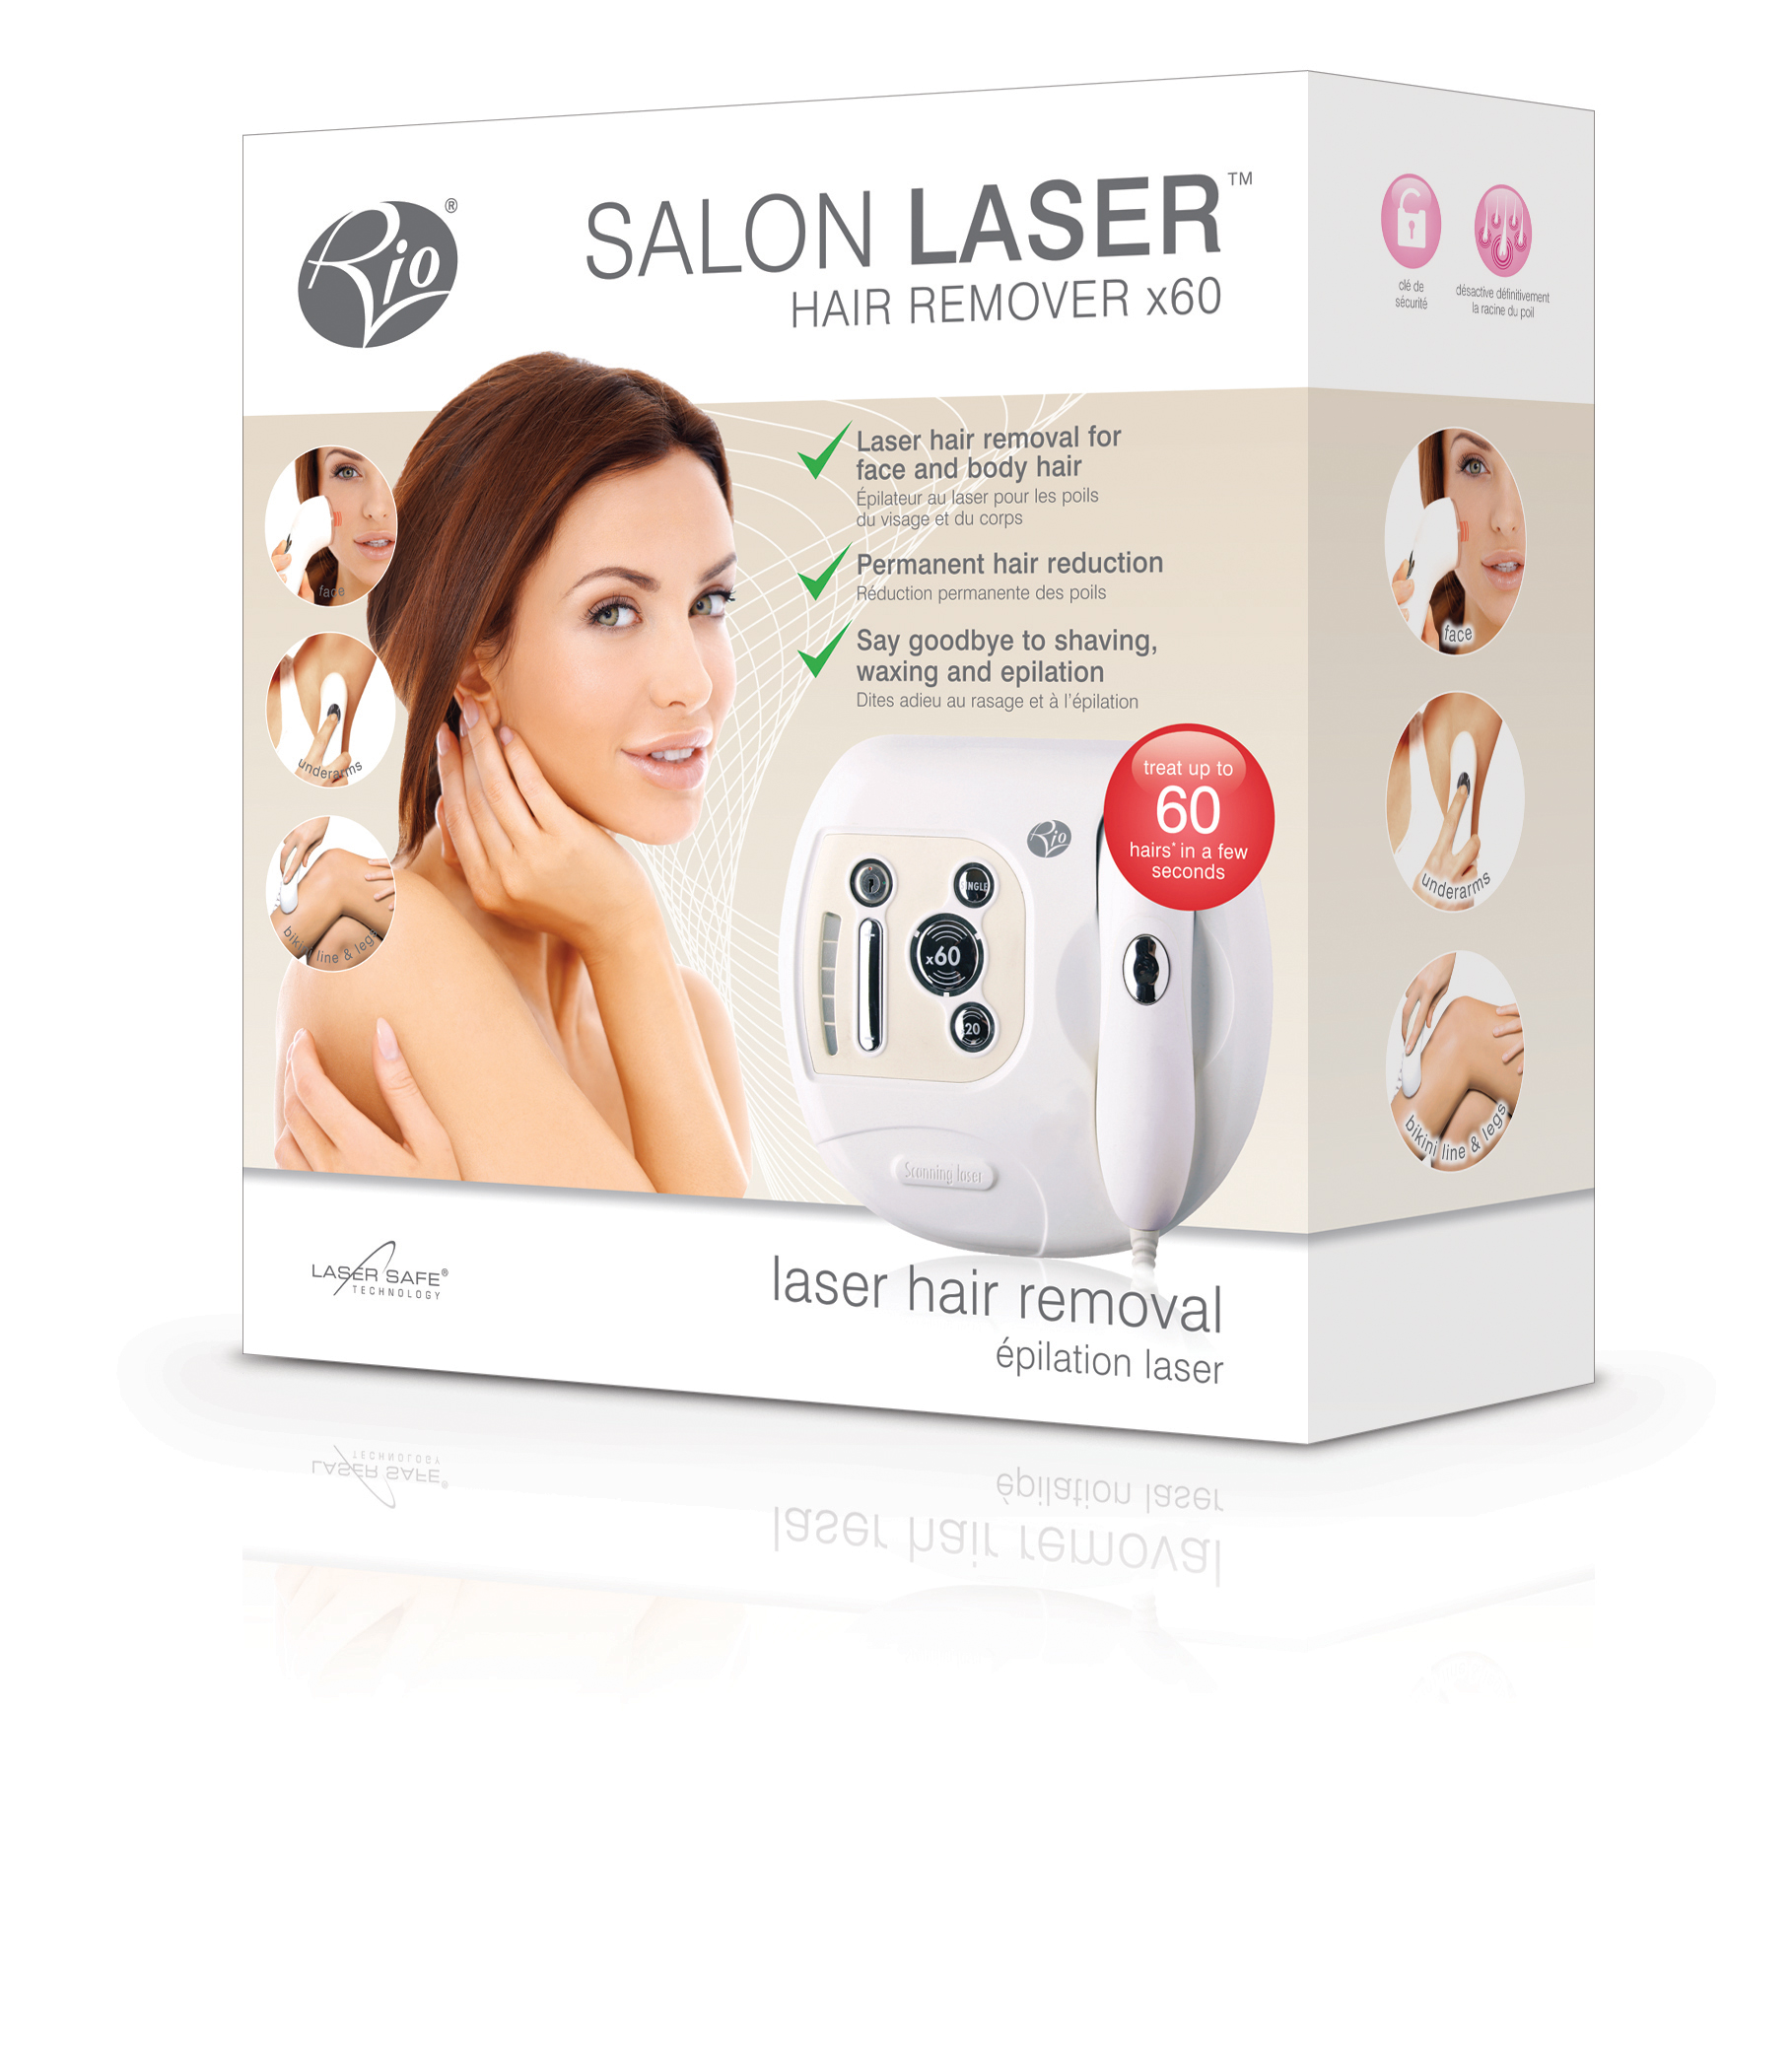 Laser Scanning Hair Remover x60 - Rio